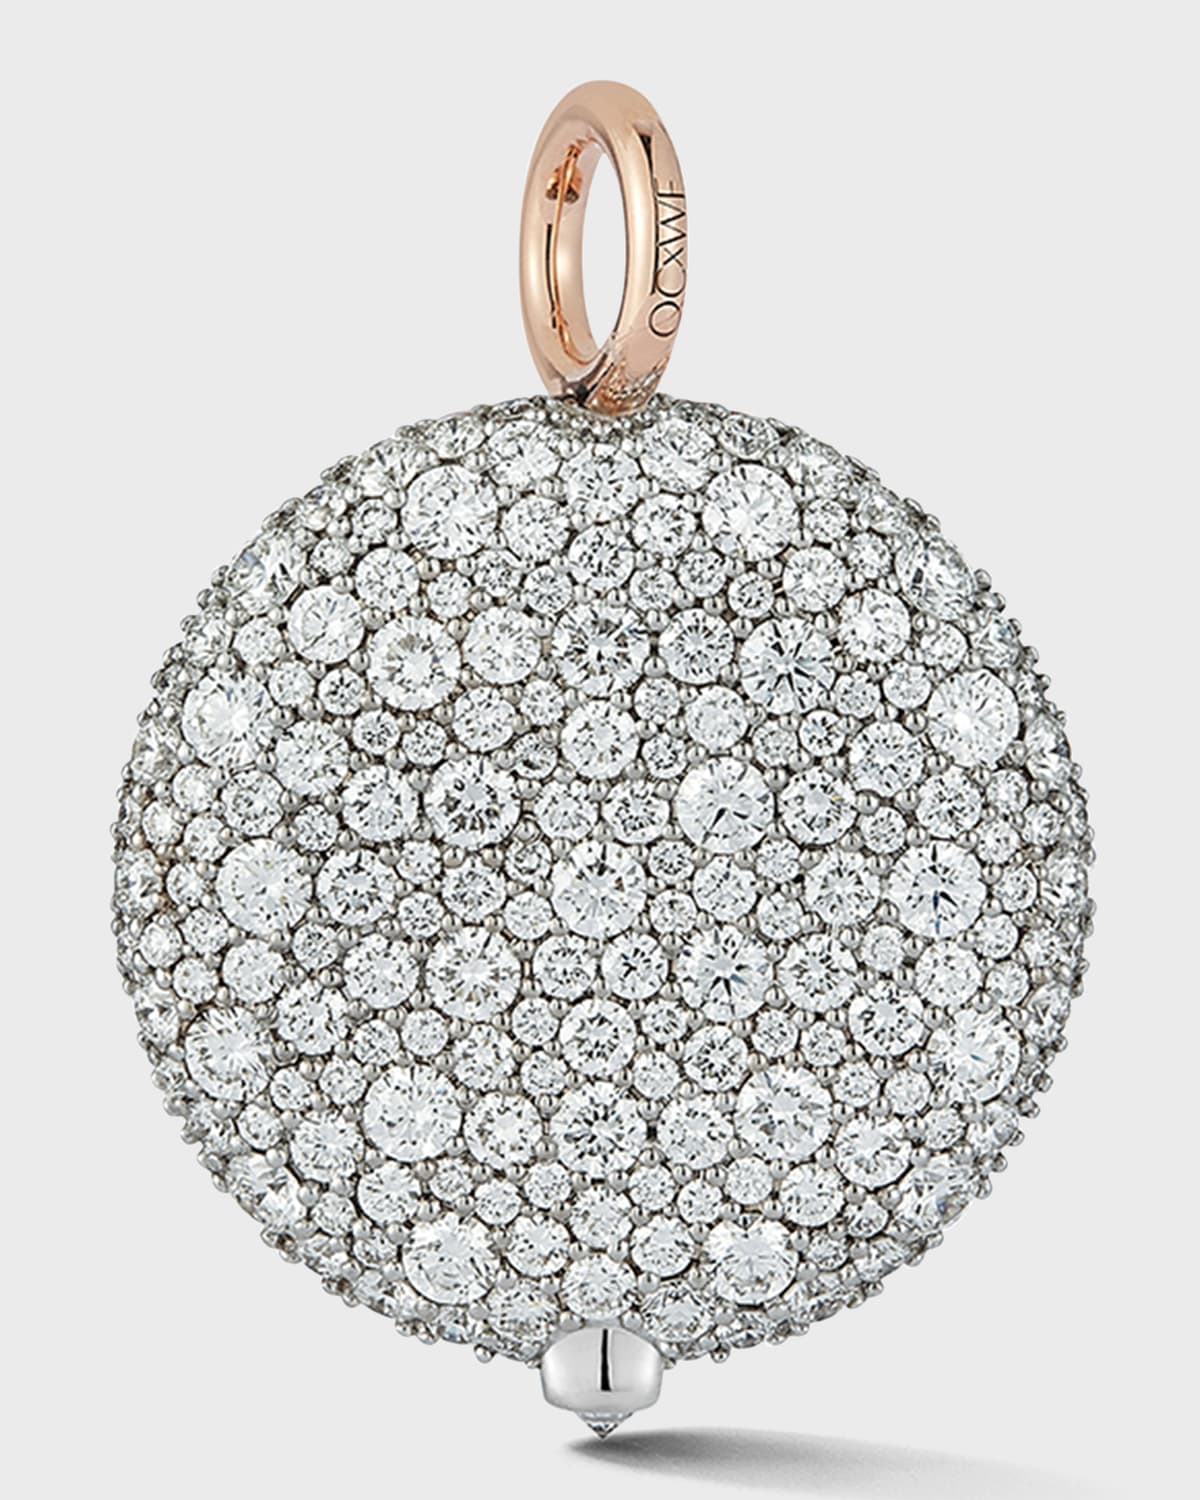 25mm Large Pebble Pendant in 18K Rose Gold and Diamonds